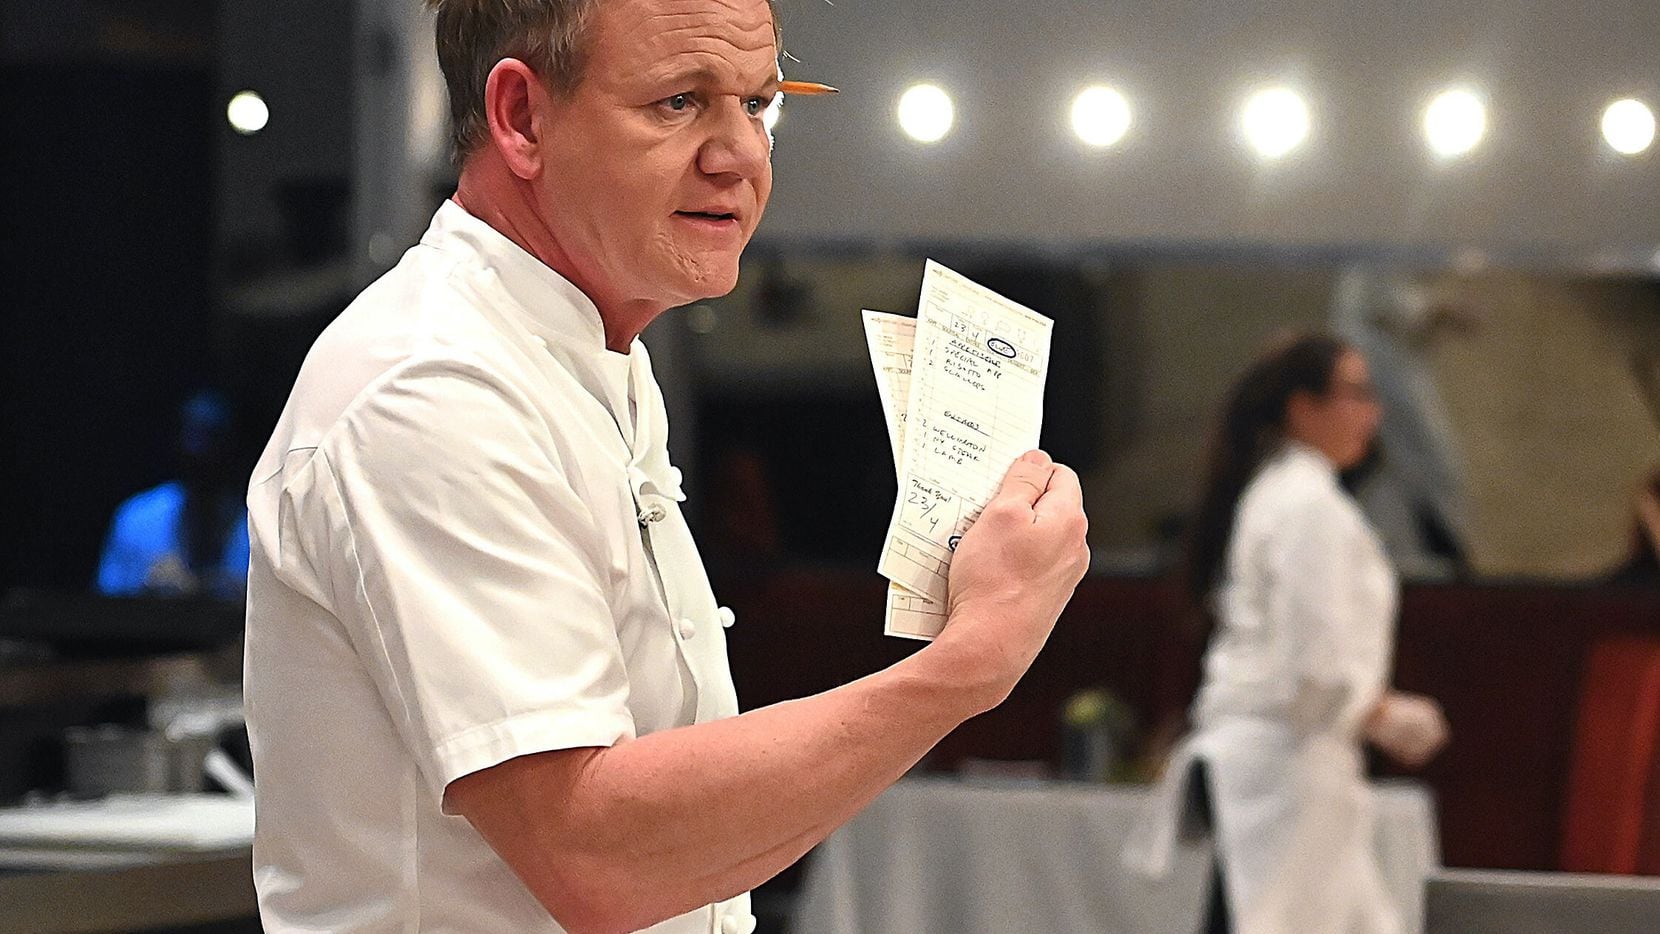 TV chef Gordon Ramsay is tough on contestants on Fox show "Hell's Kitchen." But at the end...